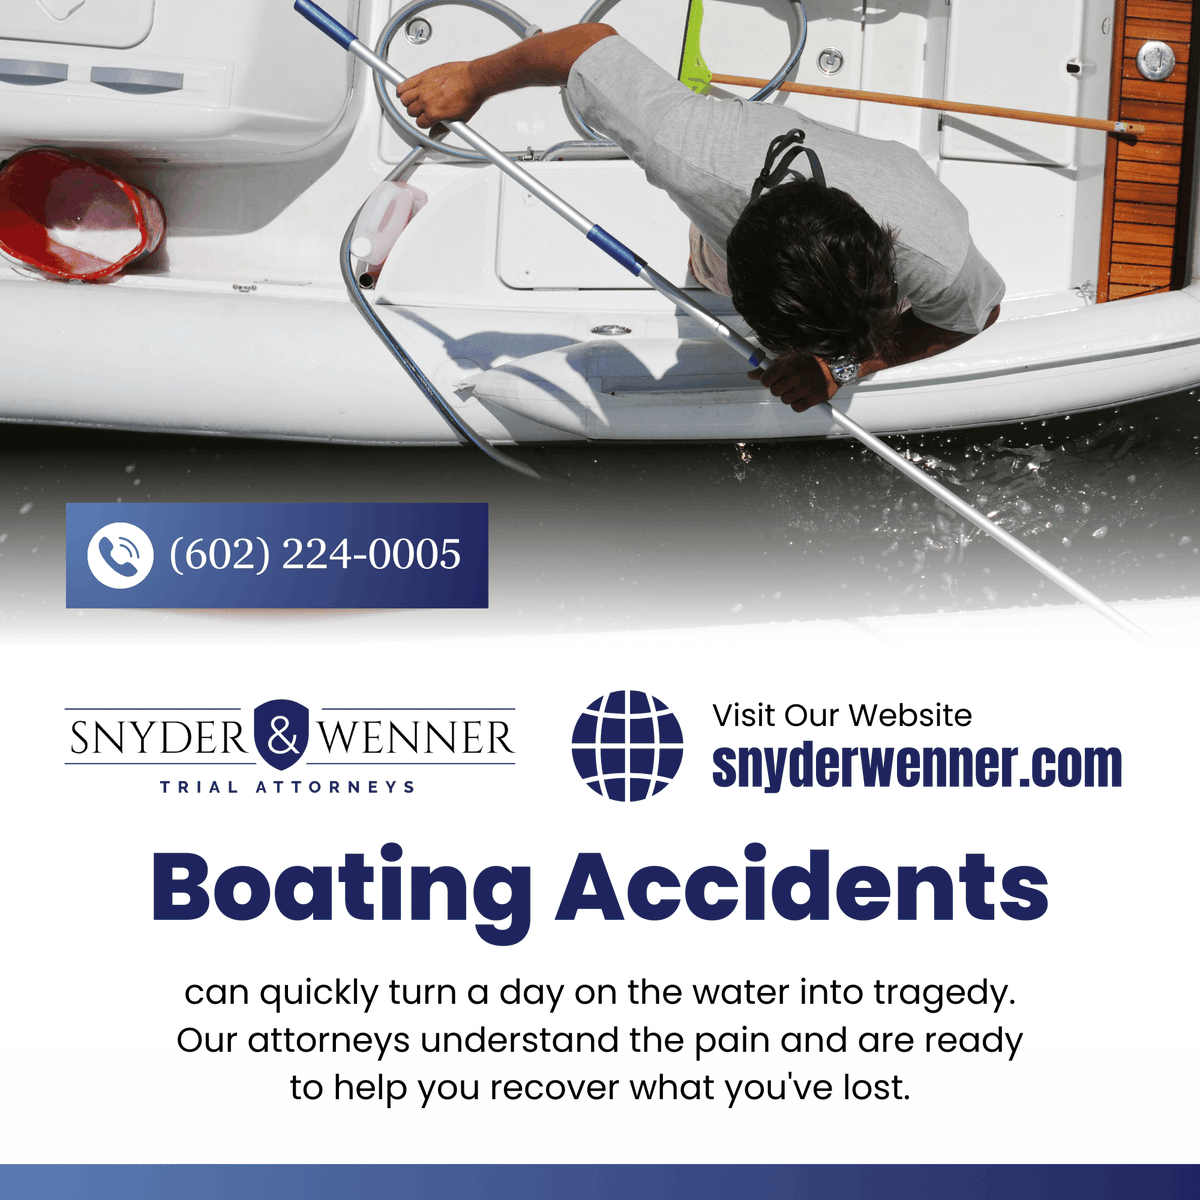 Boating accidents can quickly turn a day on the water into tragedy. Our attorneys understand the pain and are ready to help you recover what you've lost. 🚤💔 #BoatingAccidents #SnyderWennerLaw #JusticeForYou Discover how at snyderwenner.com.